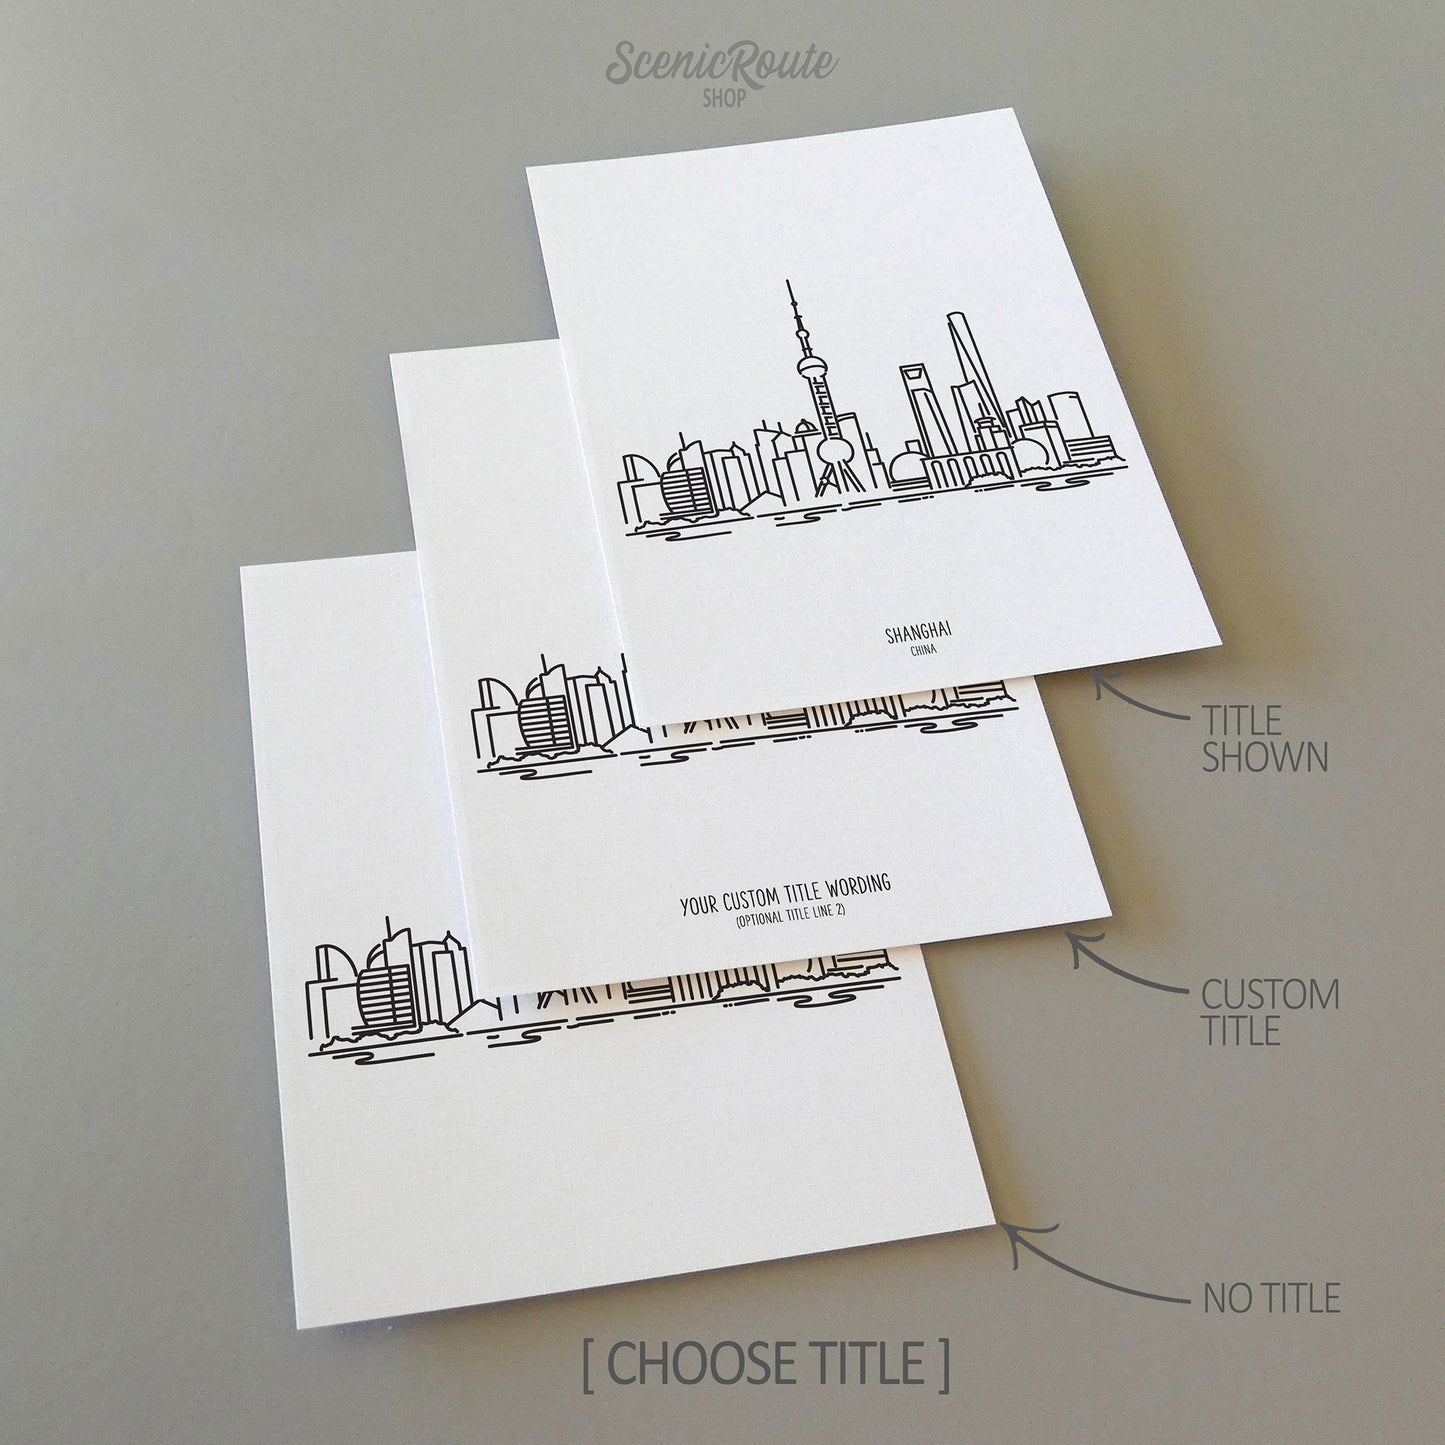 Three line art drawings of the Shanghai China Skyline on white linen paper with a gray background. The pieces are shown with title options that can be chosen and personalized.